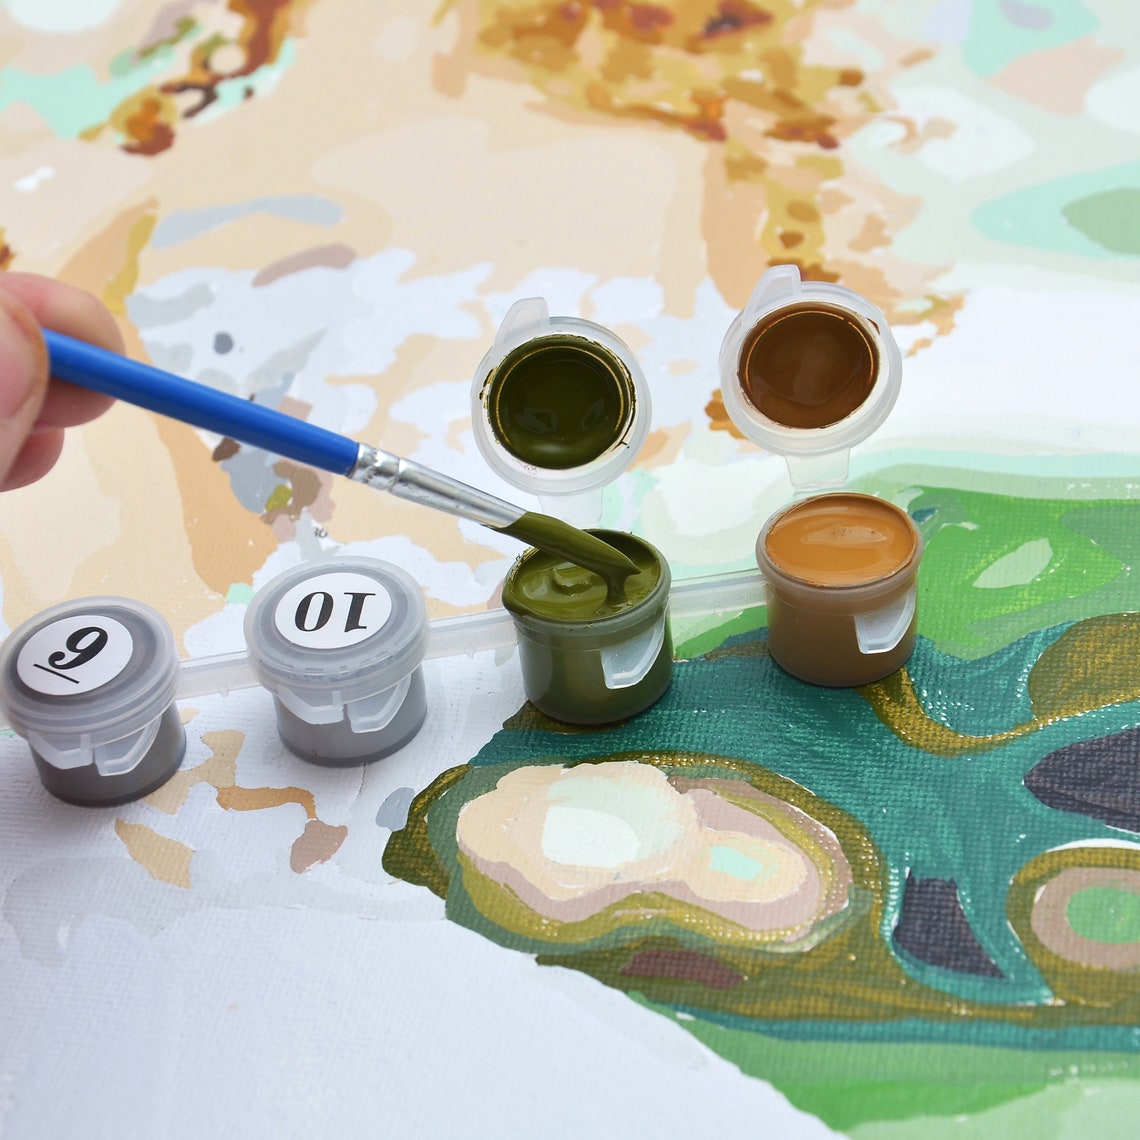 The First Vacation - Paint by Numbers Kit for Adults DIY Oil